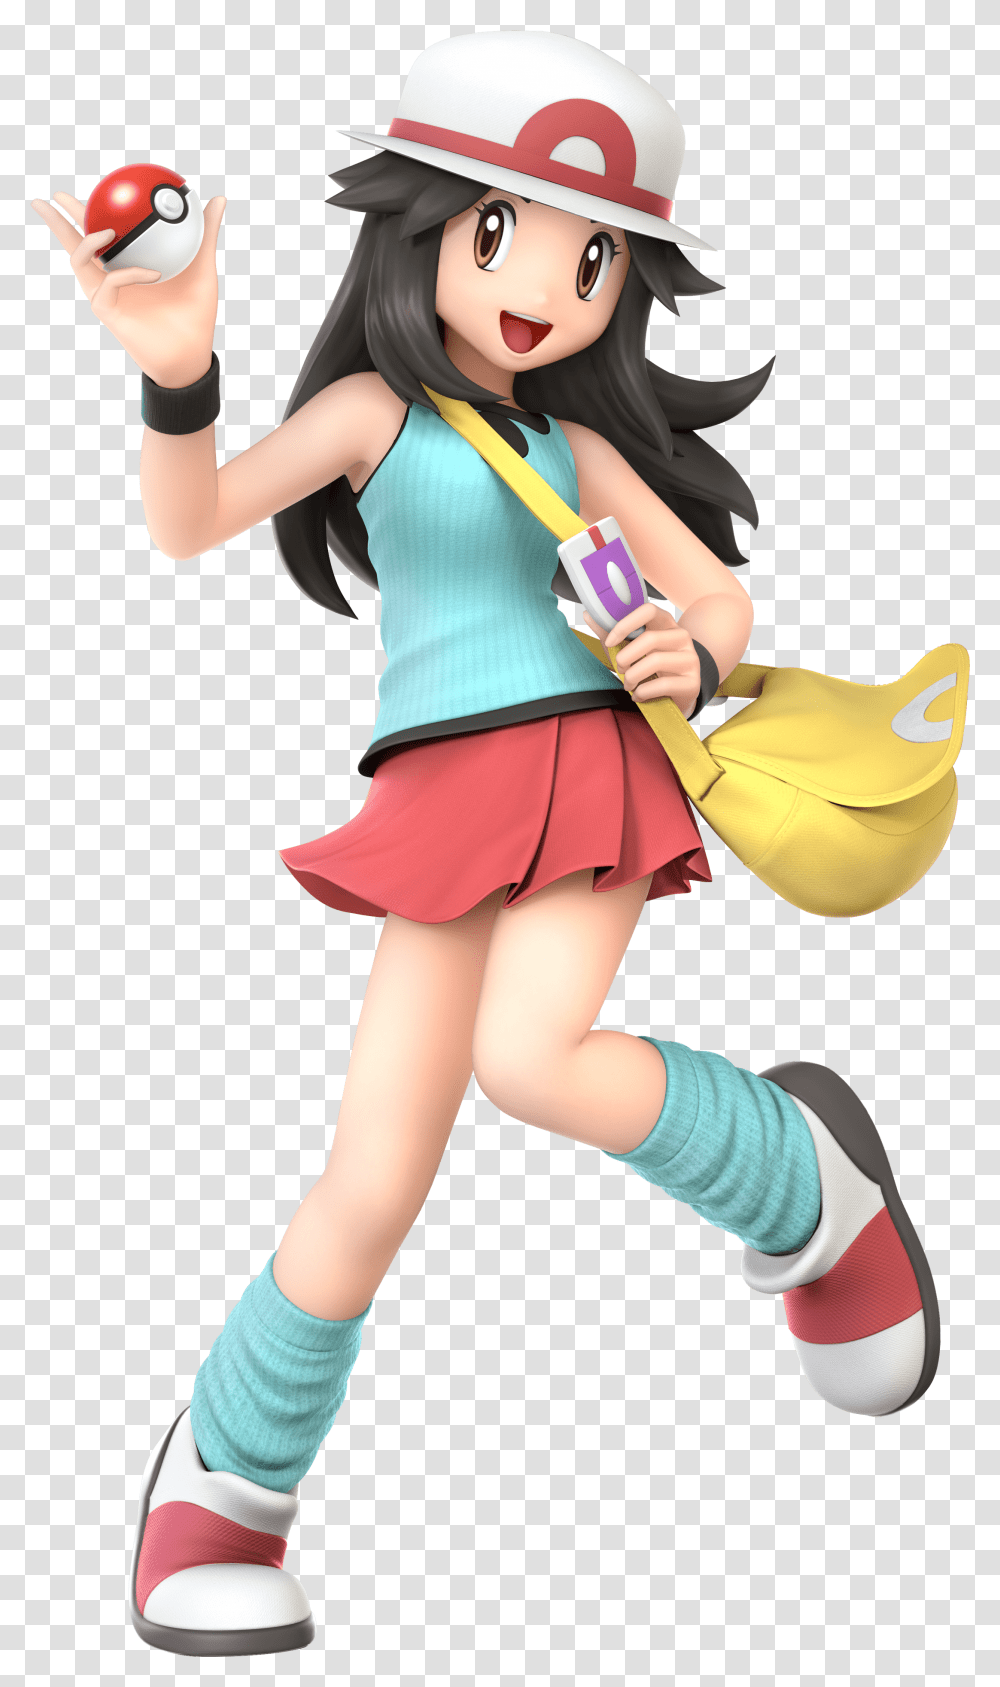 Super Smash Bros Brawl 32 To 39 Characters Tv Tropes Super Smash Bros Ultimate Pokemon Trainer, Clothing, Costume, Person, Toy Transparent Png